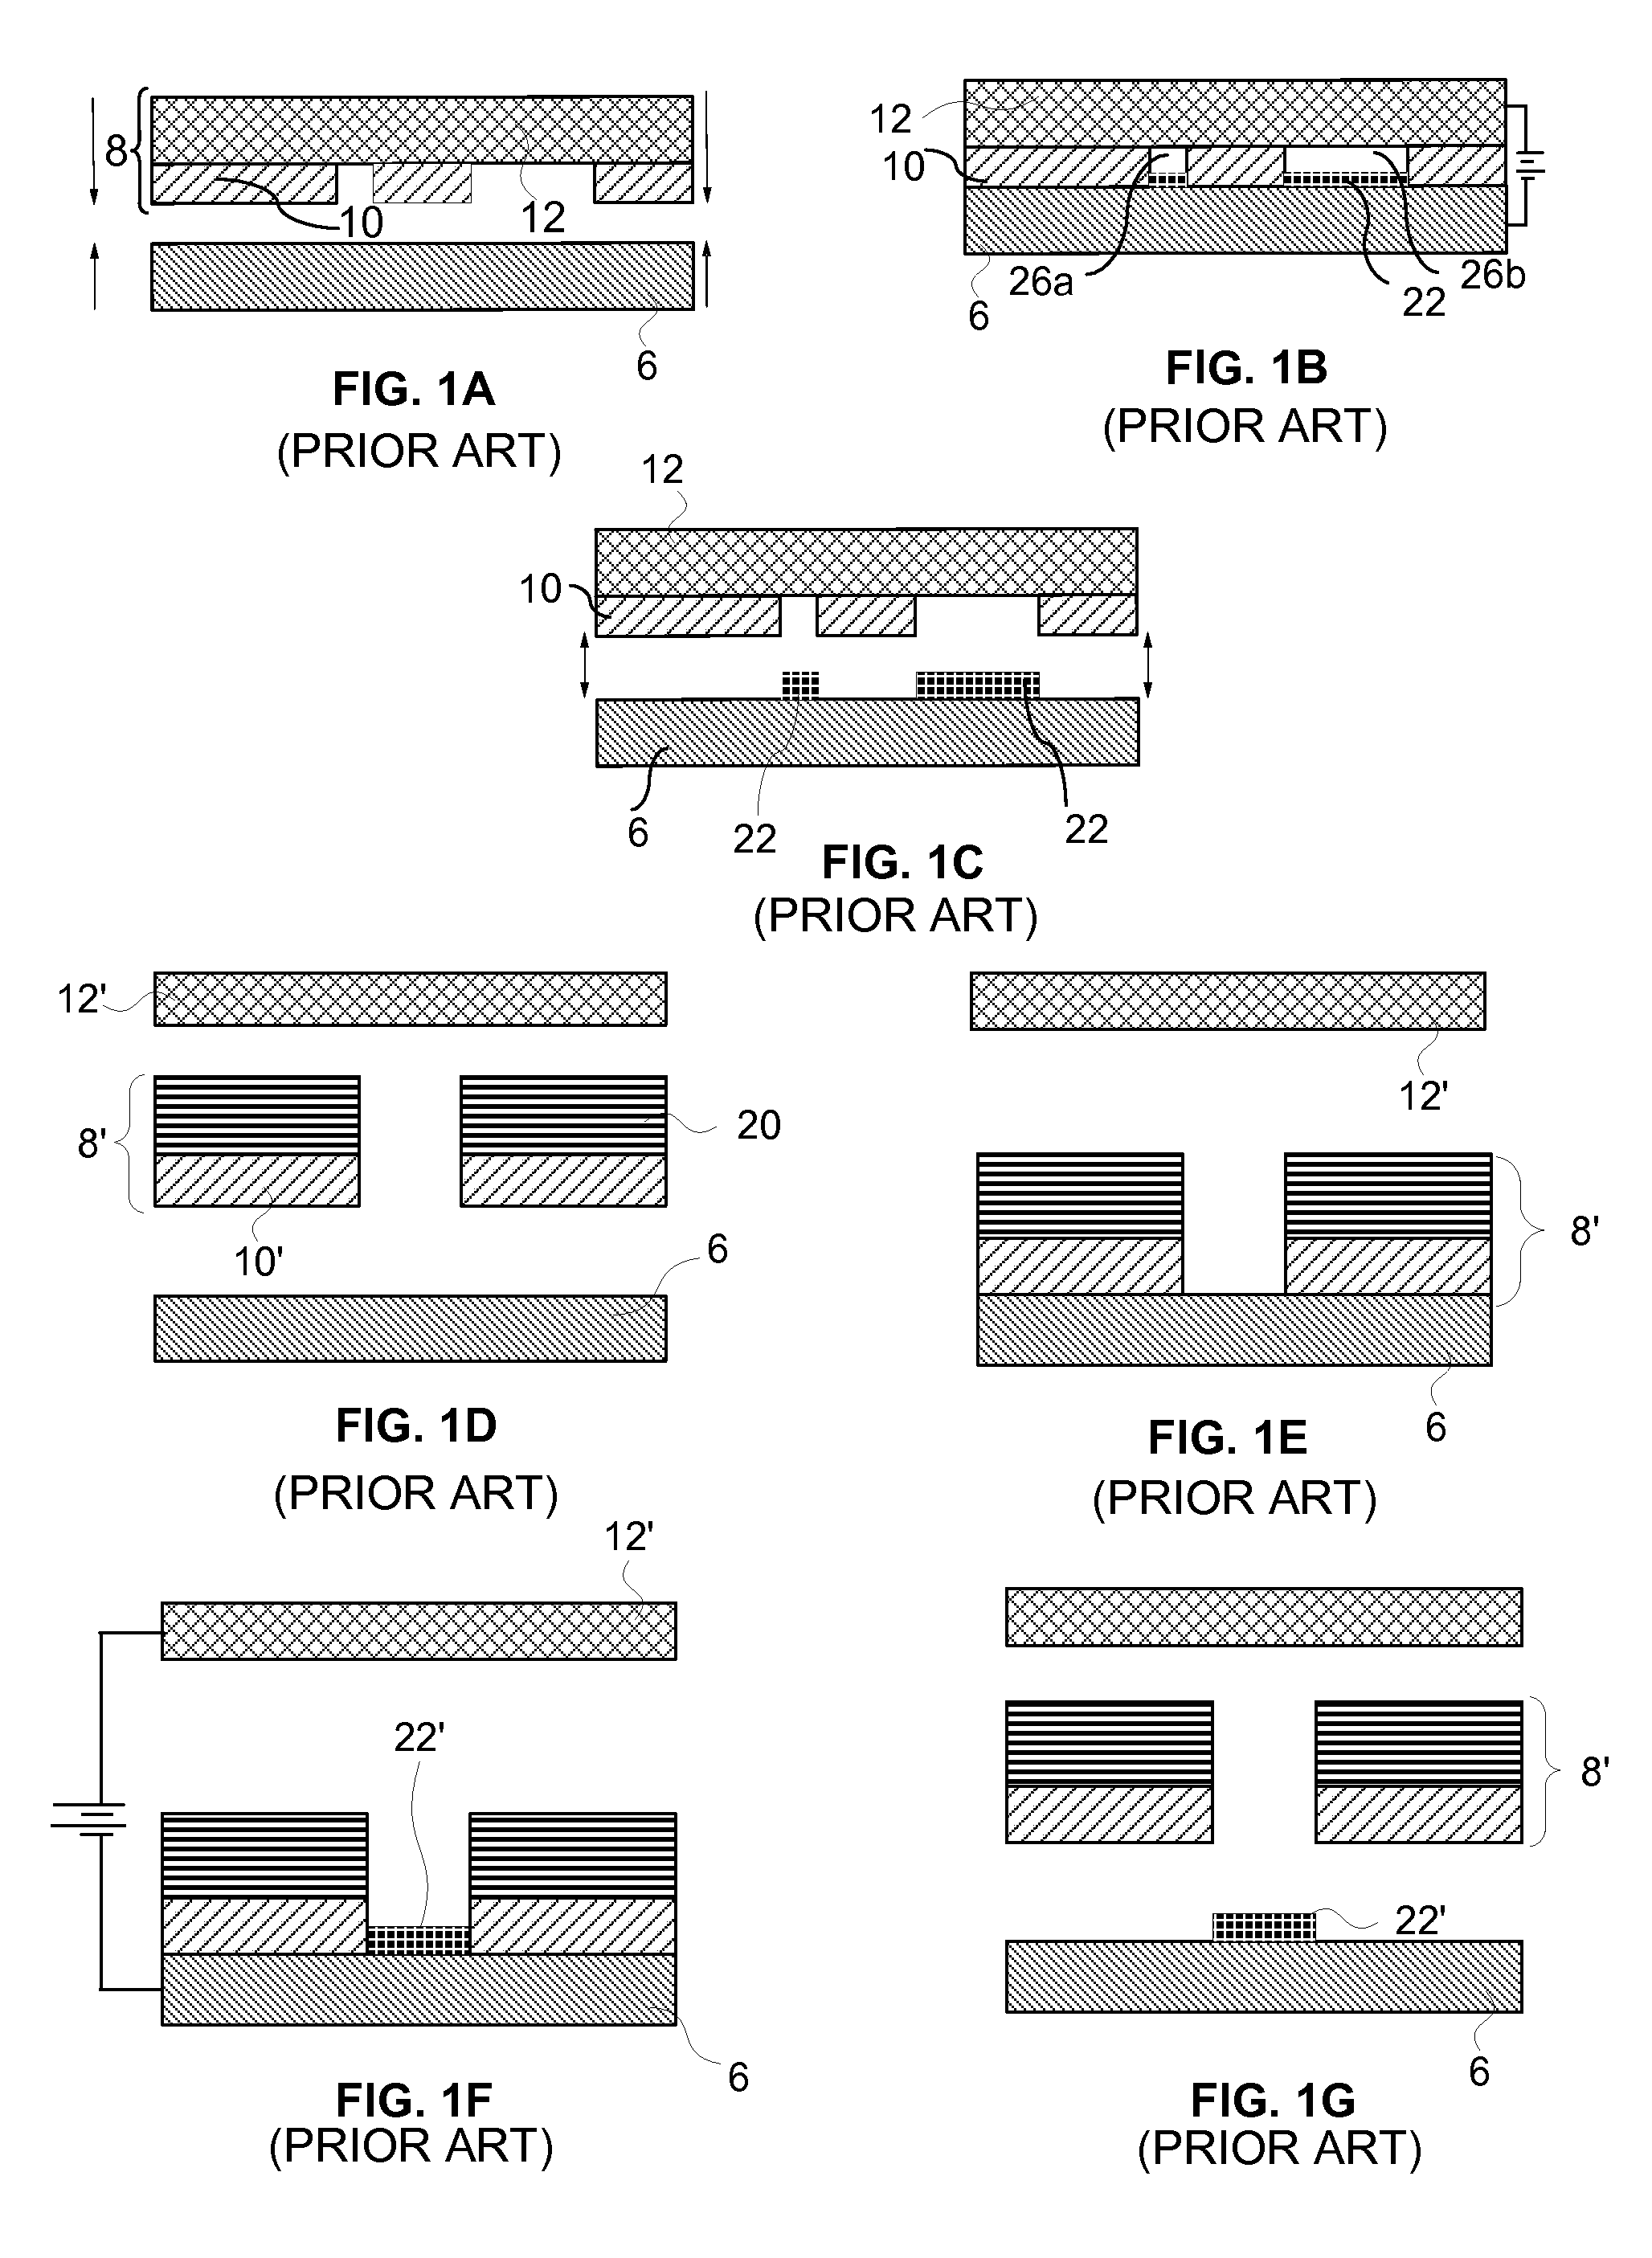 Electrochemical Fabrication Methods for Producing Multilayer Structures Including the use of Diamond Machining in the Planarization of Deposits of Material